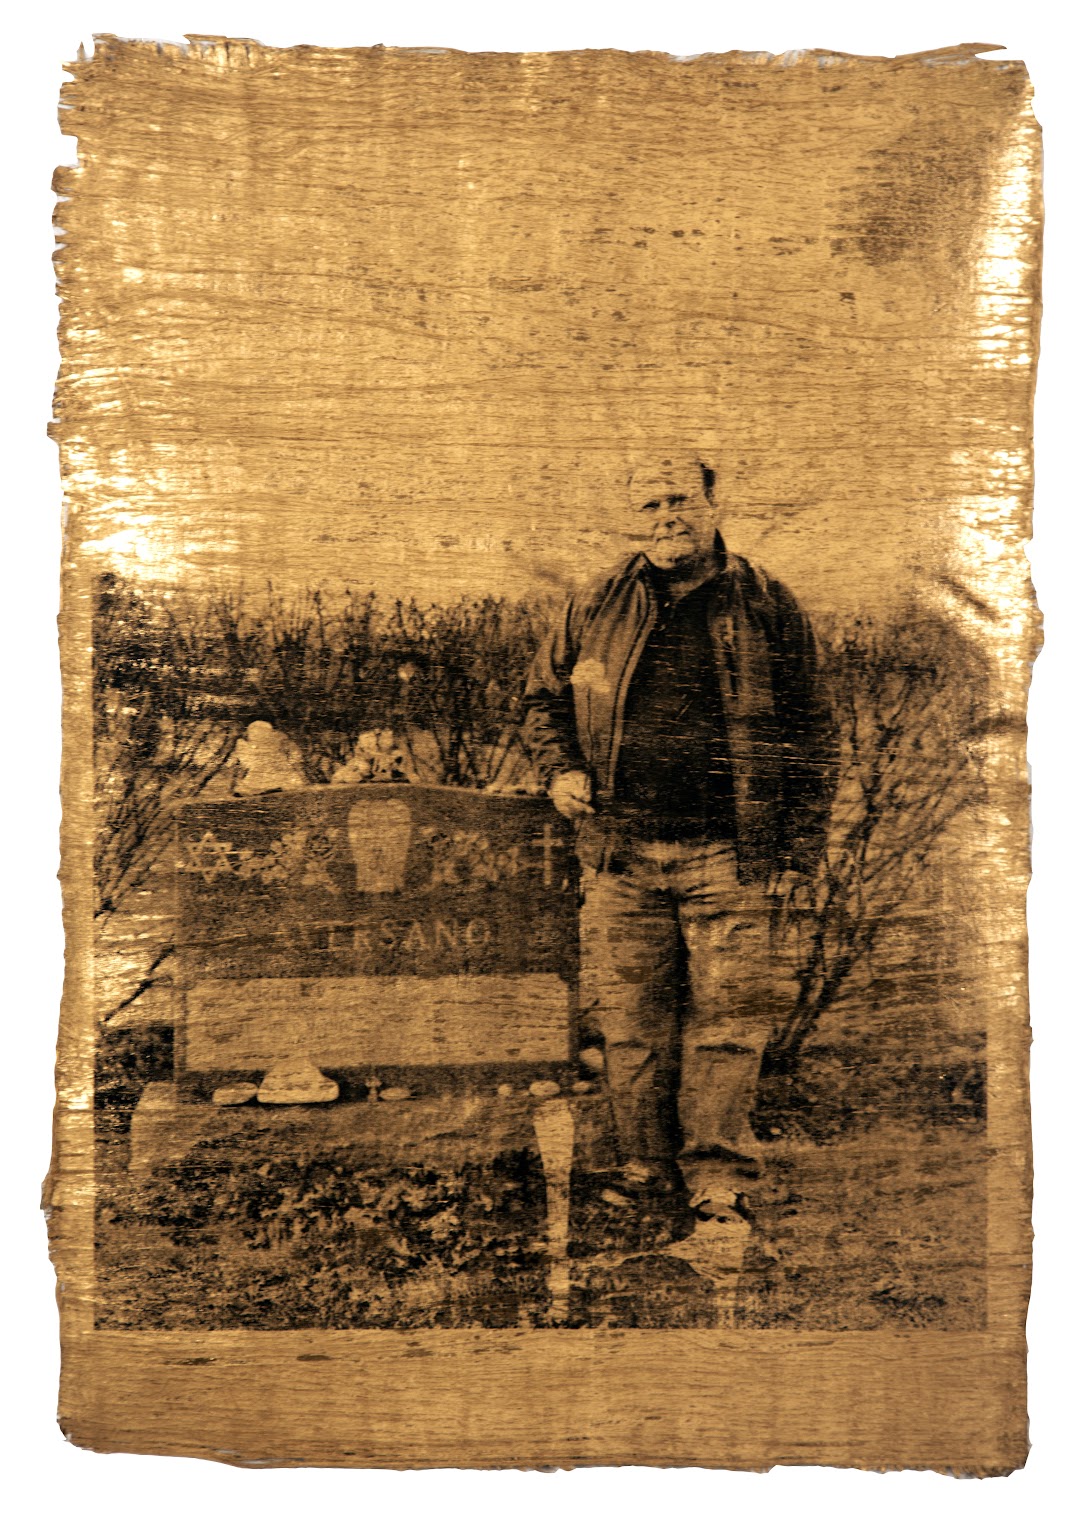 A mixed-media, silkscreen print photograph of a man holding a flower standing next to the grave of his wife. There is an open space on the headstone where his name will be written when he died.